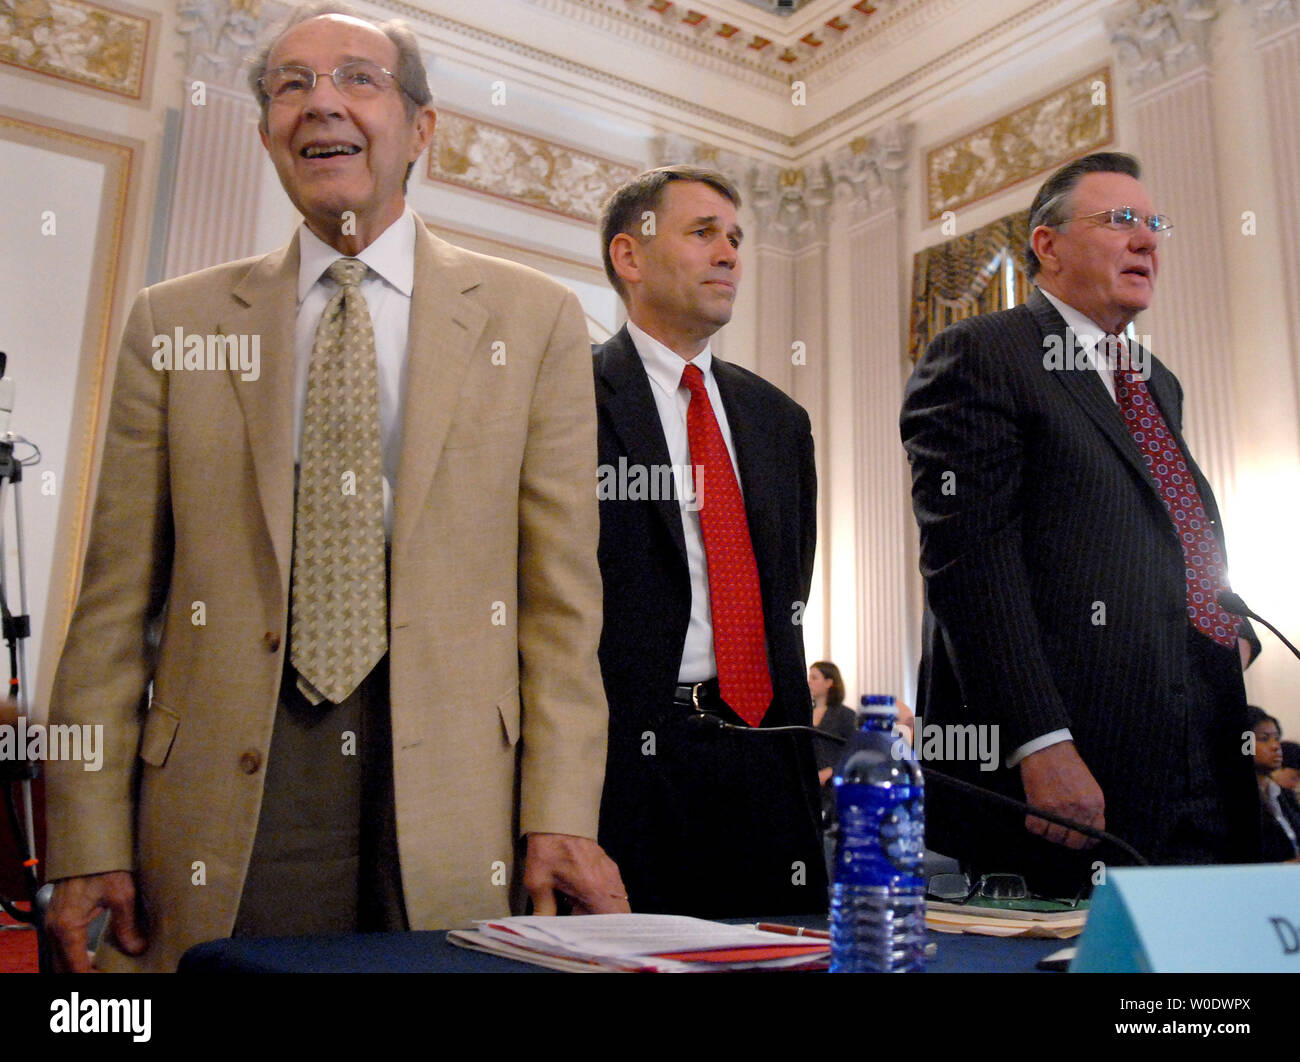 Retired Army Major John Batise (C), former U.S. Secretary of Defense William J. Perry (L) and Retired Army Gen. John Keane (L) prepare to testify before a House Armed Services and Foreign Affairs joint Committee hearing entitled 'Whats Next for Iraq' in Washington on September 6, 2007. (UPI Photo/Kevin Dietsch) Stock Photo